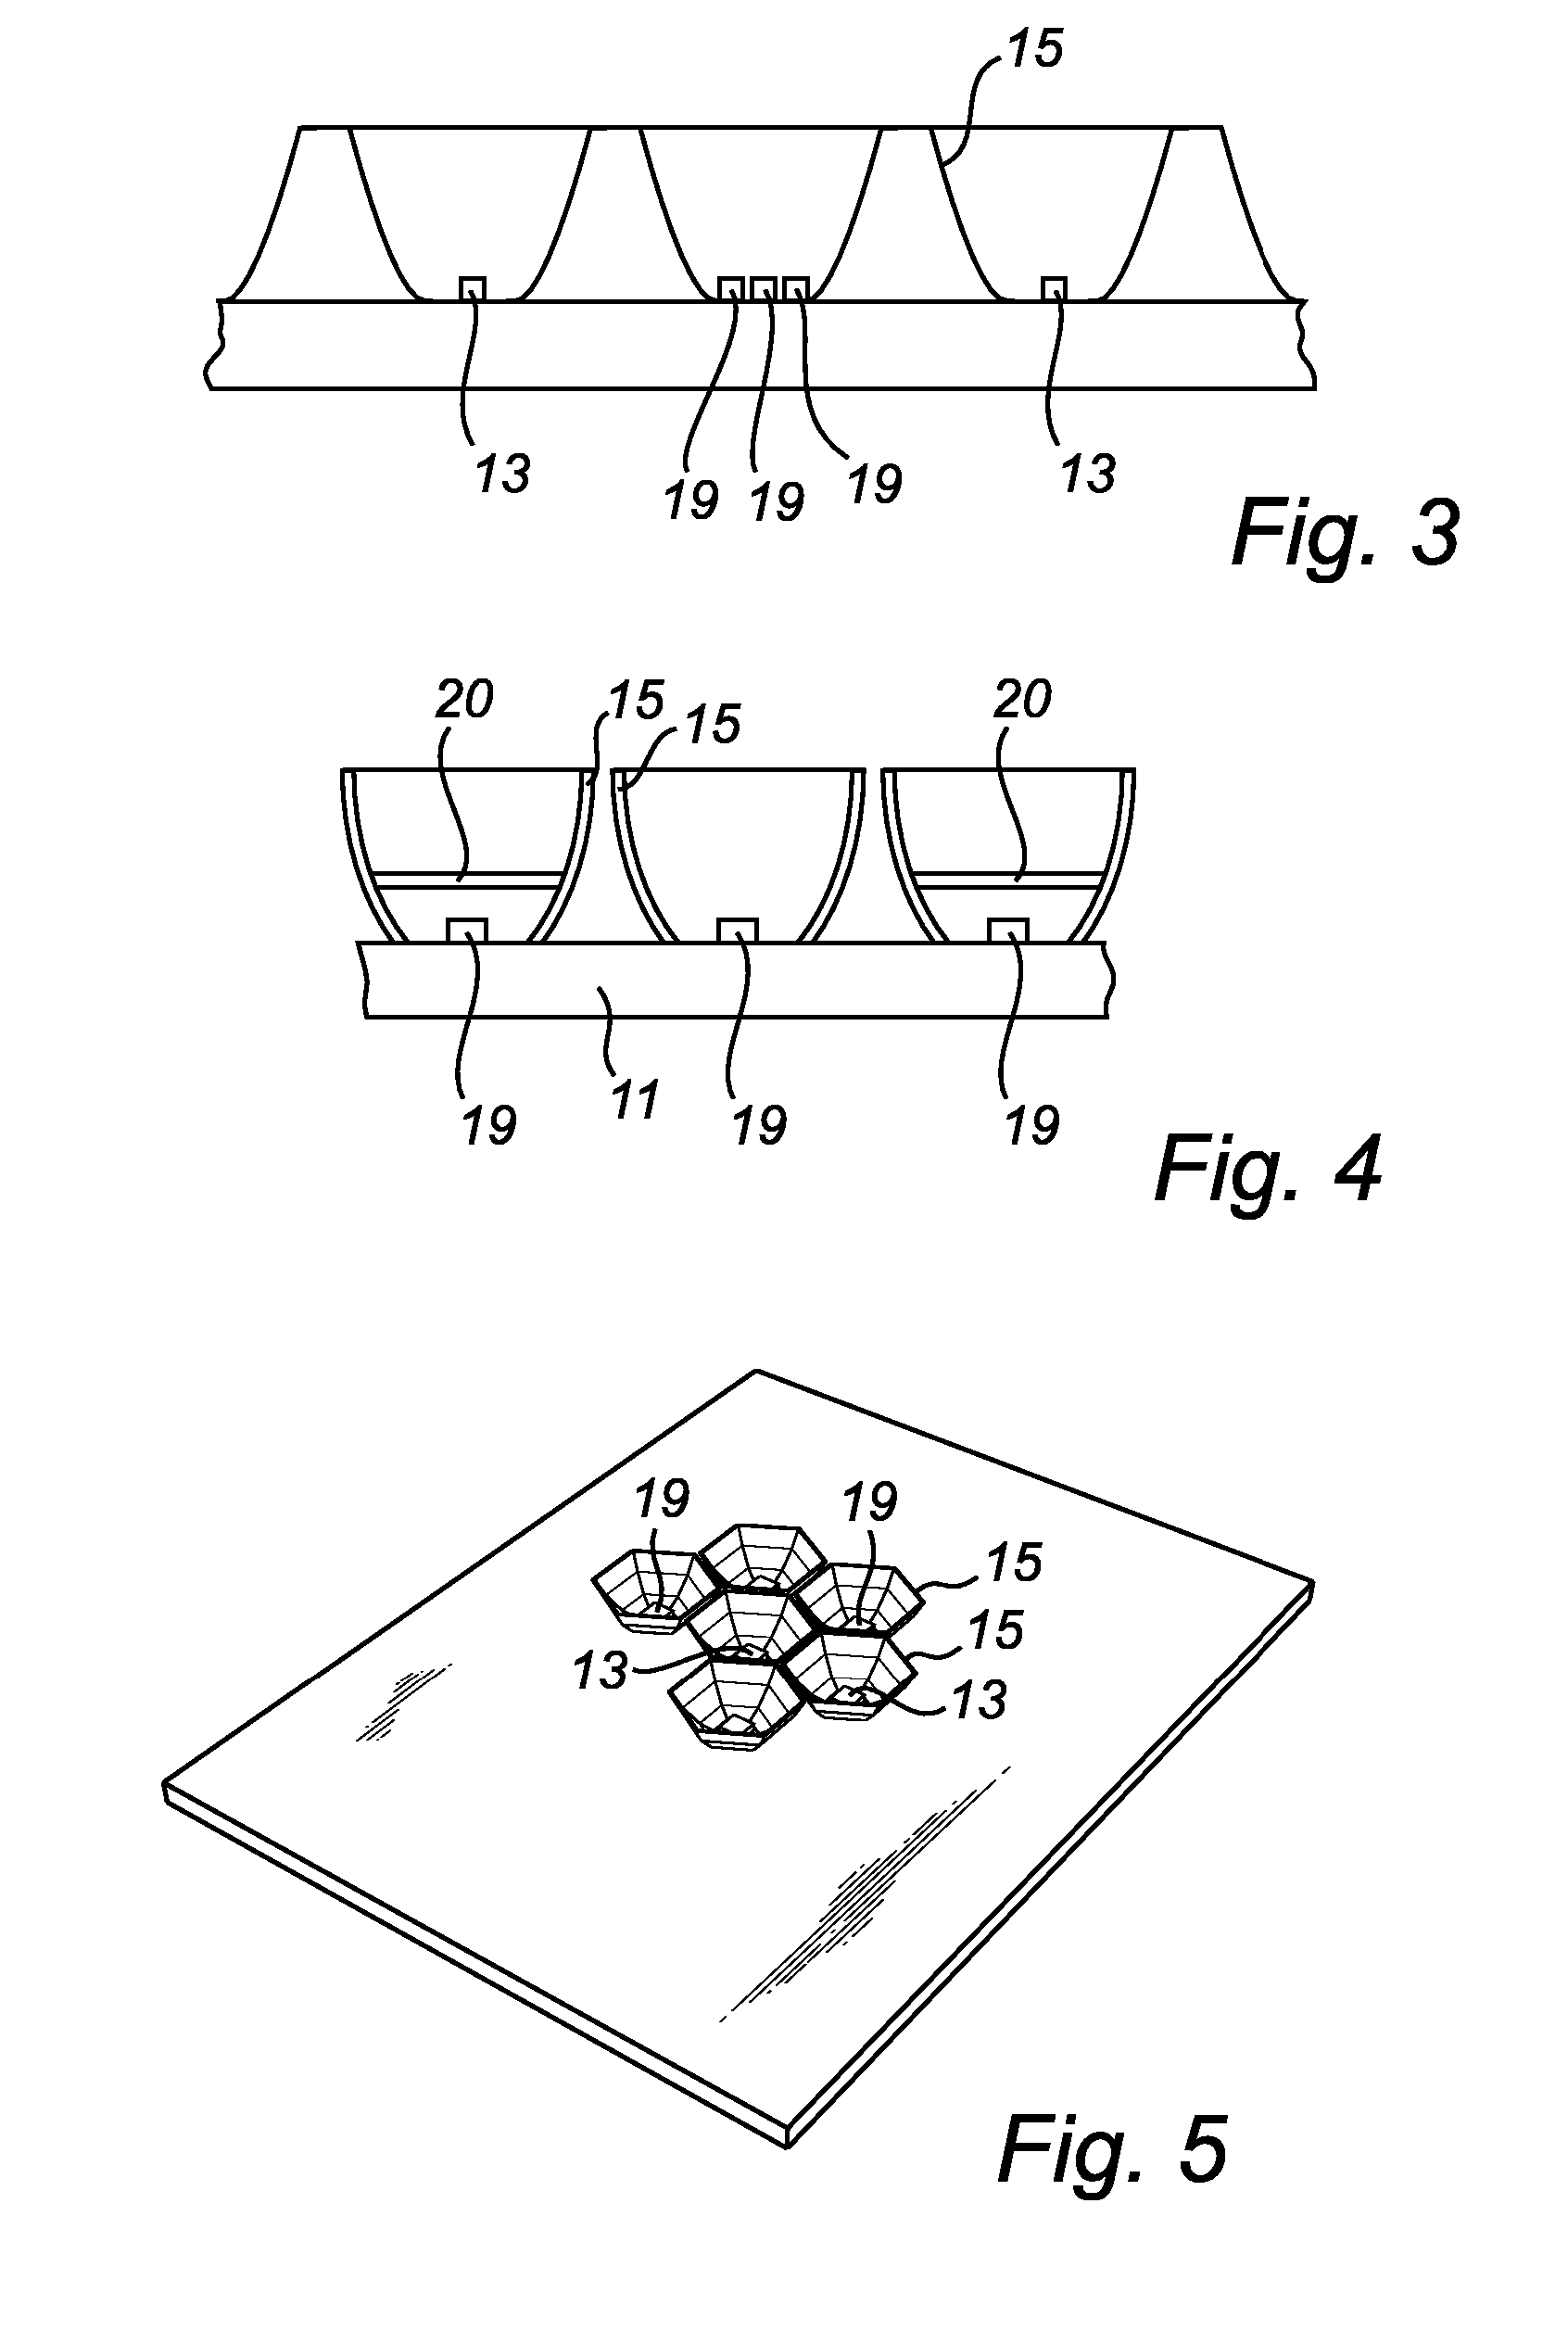 Feedback controlled illumination system having an array of leds, and a detector among the leds